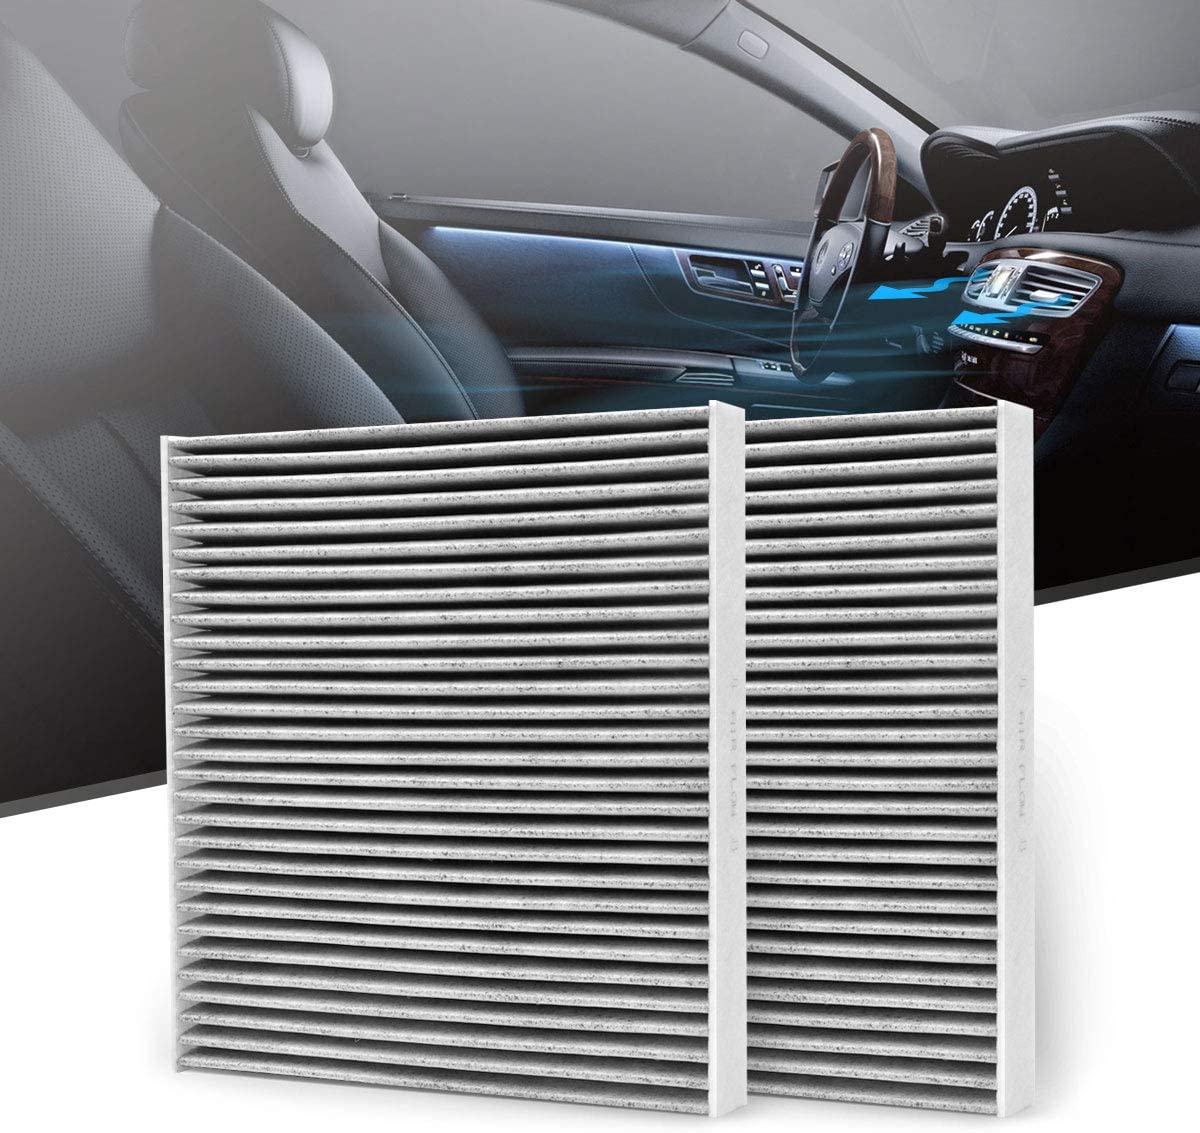 KAFEEK Cabin Air Filter Fits CF10133, 88568-02020, 88568-02030, 87139YZZ07, Replacement for Toyota Corolla Matrix, Includes Activated Carbon (2-Pack)